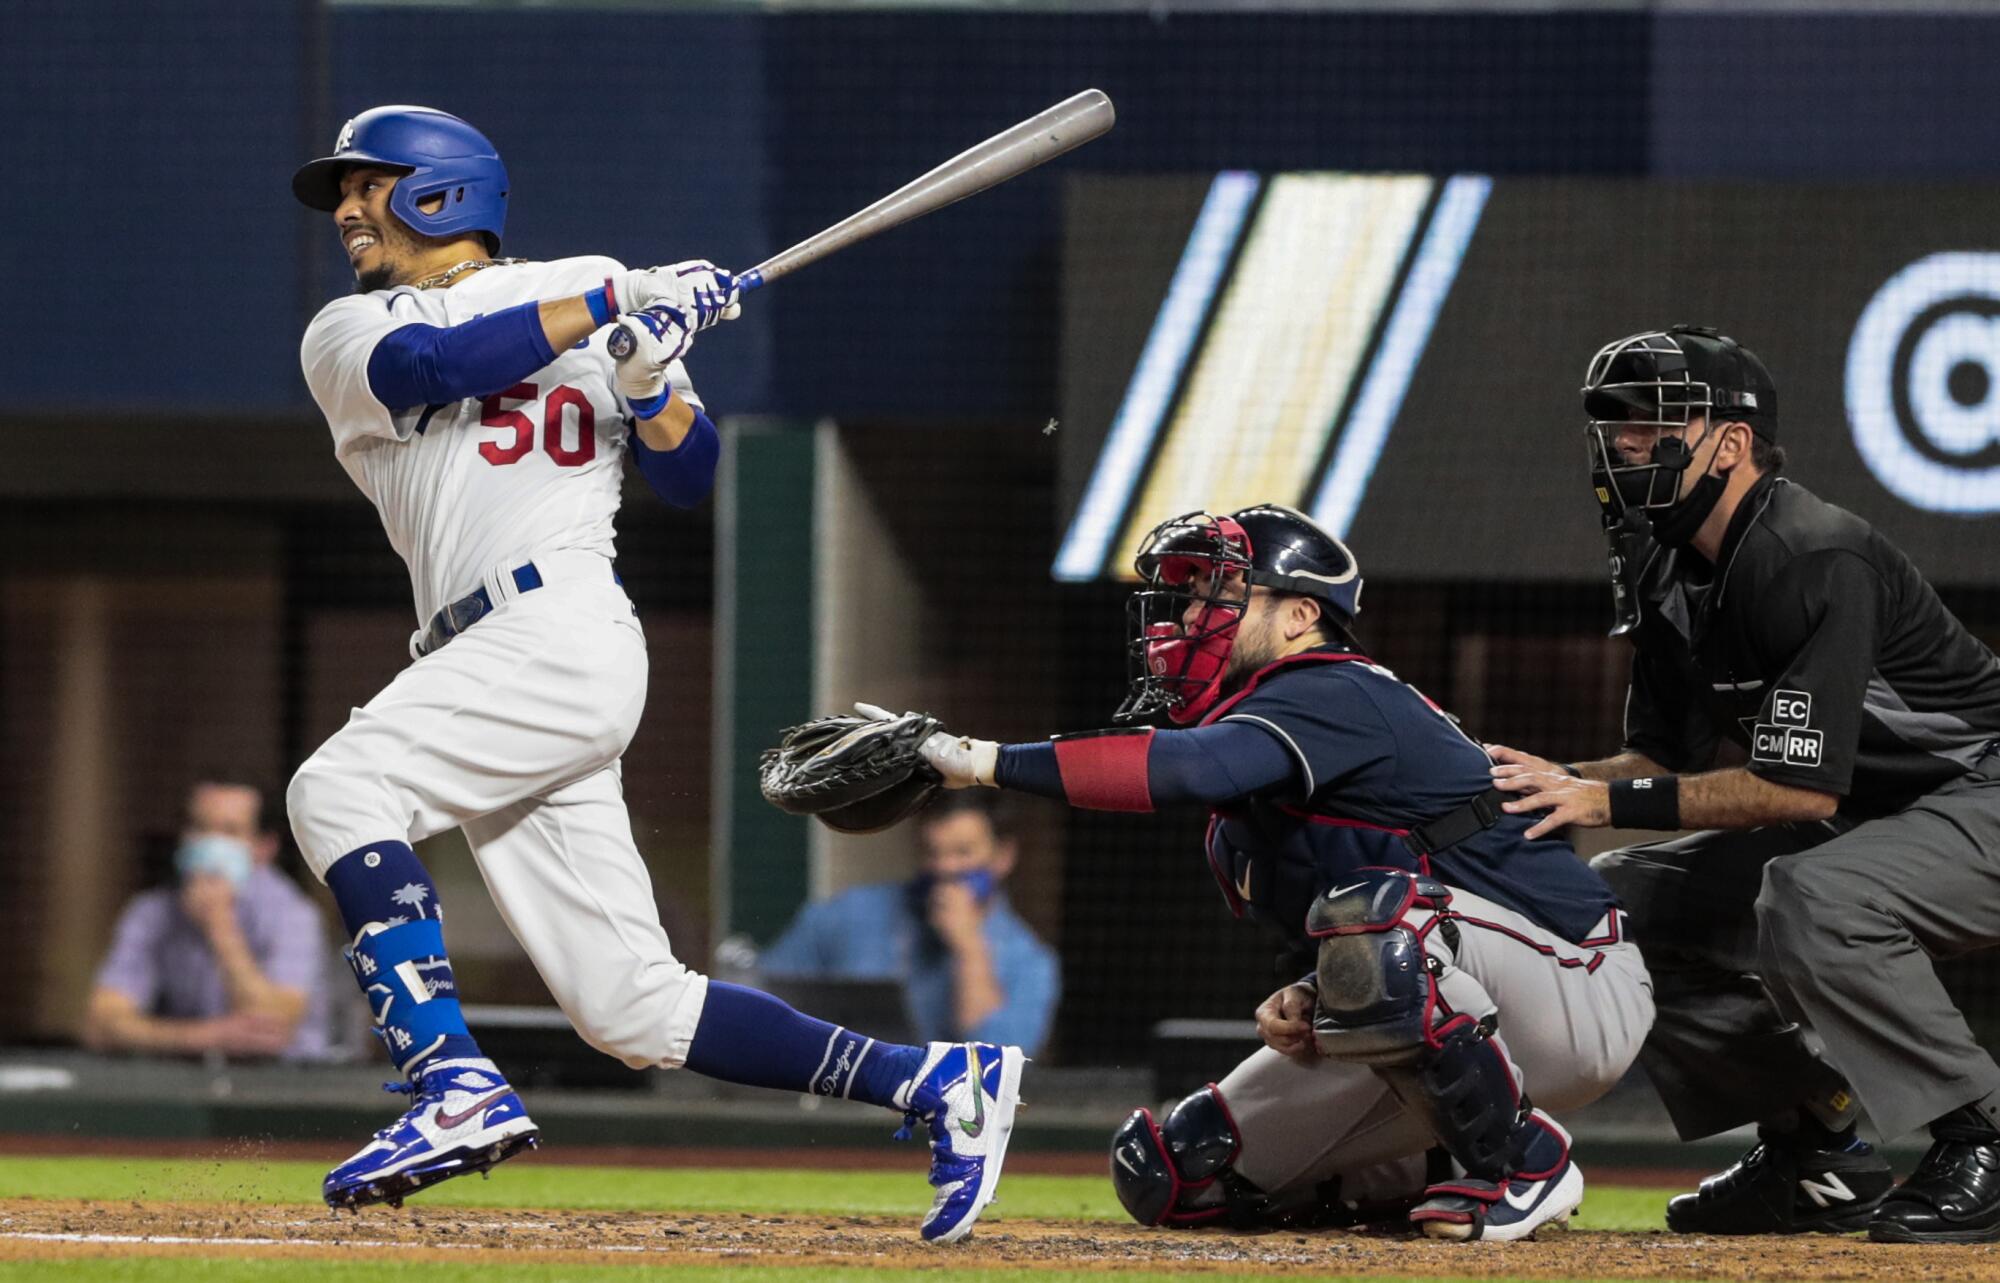 Dodgers right fielder Mookie Betts lines out to center field during the third inning in Game 1 of the NLCS.